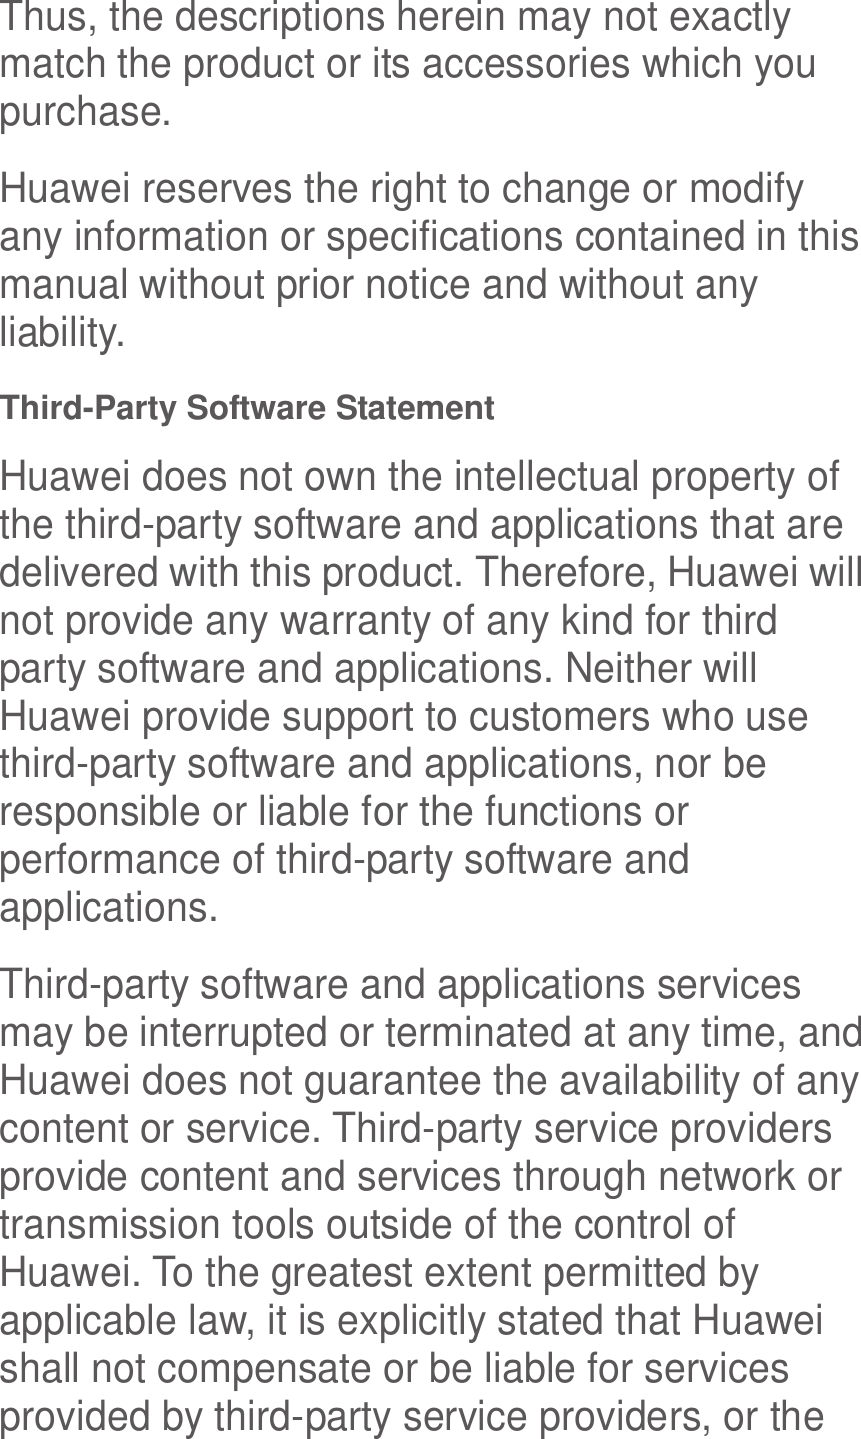  Thus, the descriptions herein may not exactly match the product or its accessories which you purchase. Huawei reserves the right to change or modify any information or specifications contained in this manual without prior notice and without any liability. Third-Party Software Statement Huawei does not own the intellectual property of the third-party software and applications that are delivered with this product. Therefore, Huawei will not provide any warranty of any kind for third party software and applications. Neither will Huawei provide support to customers who use third-party software and applications, nor be responsible or liable for the functions or performance of third-party software and applications. Third-party software and applications services may be interrupted or terminated at any time, and Huawei does not guarantee the availability of any content or service. Third-party service providers provide content and services through network or transmission tools outside of the control of Huawei. To the greatest extent permitted by applicable law, it is explicitly stated that Huawei shall not compensate or be liable for services provided by third-party service providers, or the 